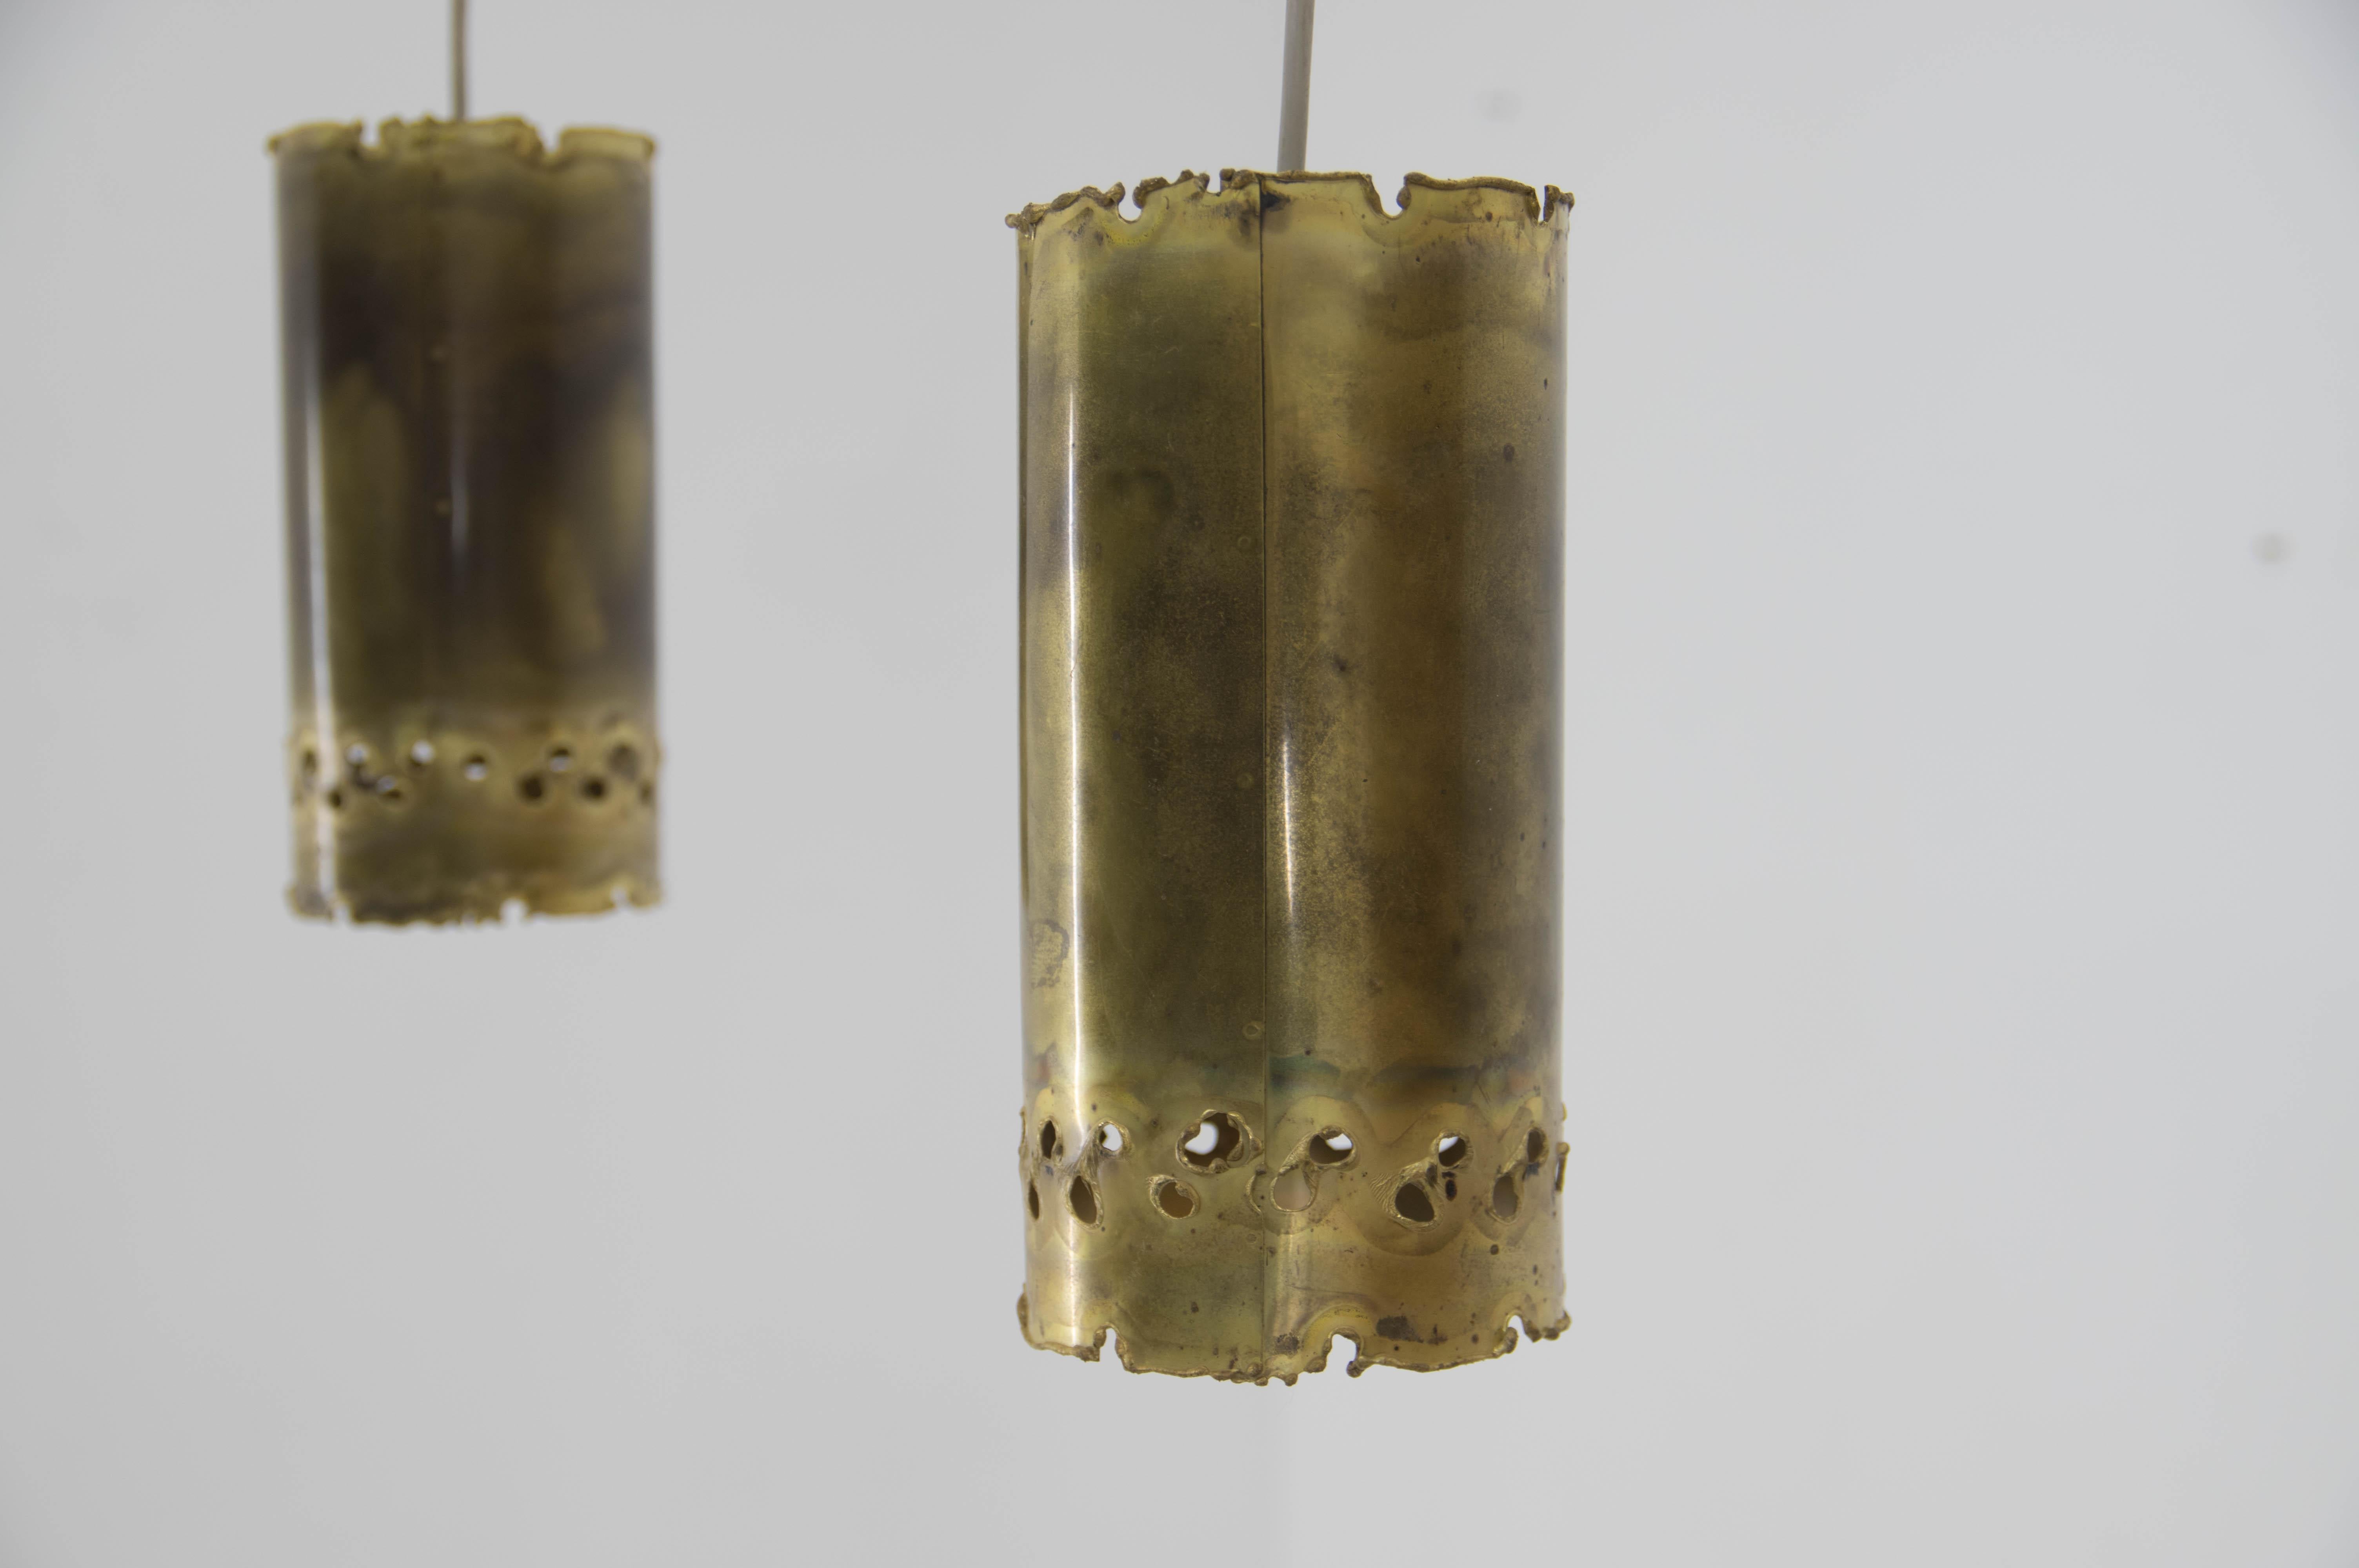 A pair of Brutalist acid treated and torch-cut pendants was designed by Svend Aage Holm Sørensen in the early 1960s. Manufactured by Holm Sørensen in Denmark. Perfect original condition.
1x60W, E25-E27 bulb
US wiring compatible.